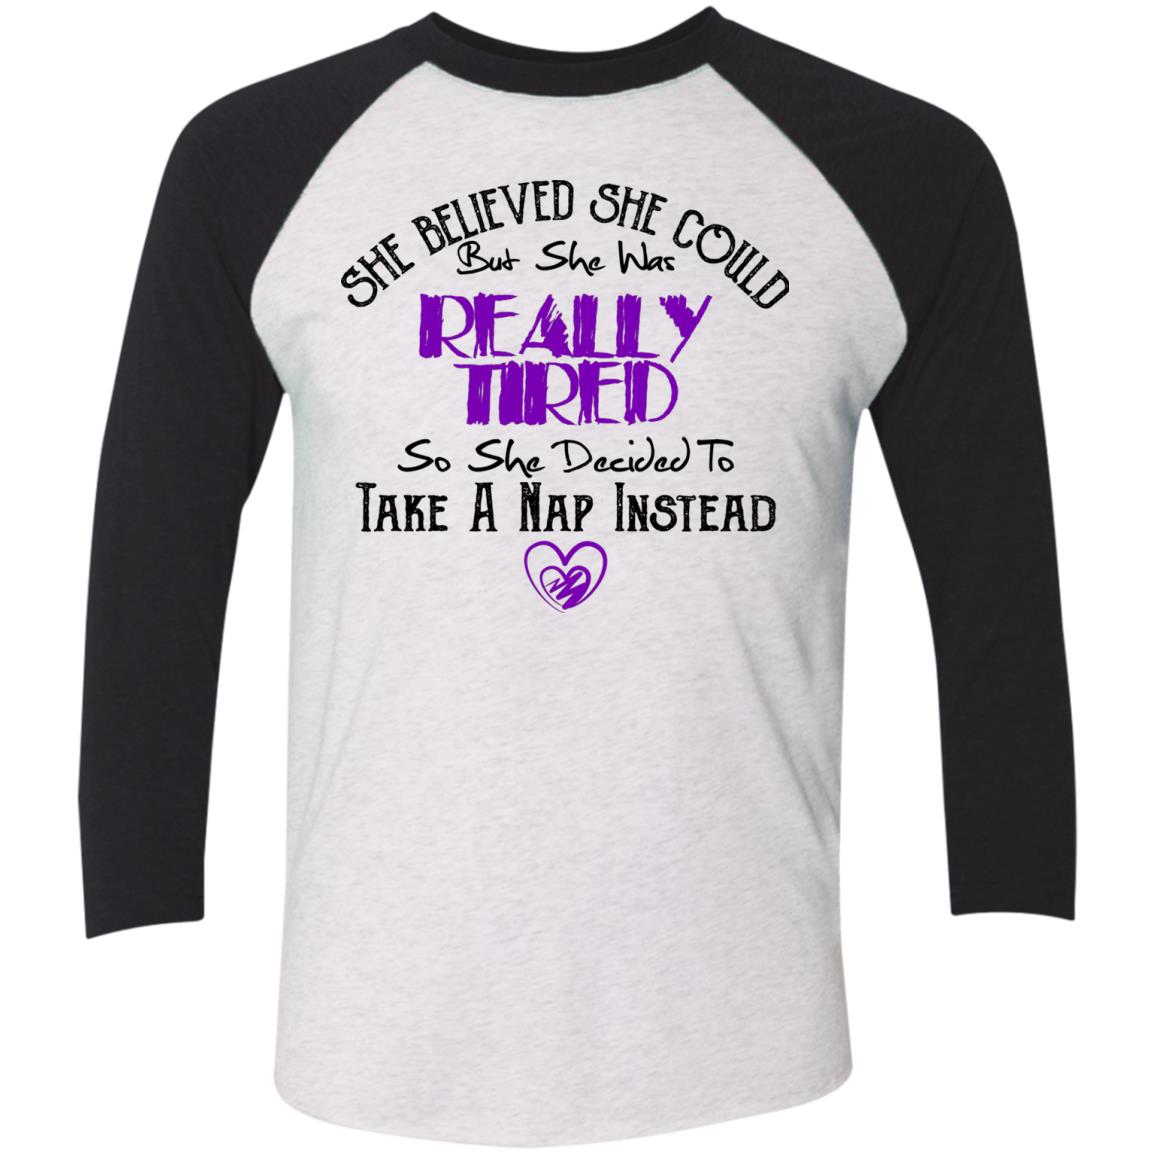 Funny Baseball Raglan T-Shirt - She Believed She Could But She Was Tiered - GoneBold.gift